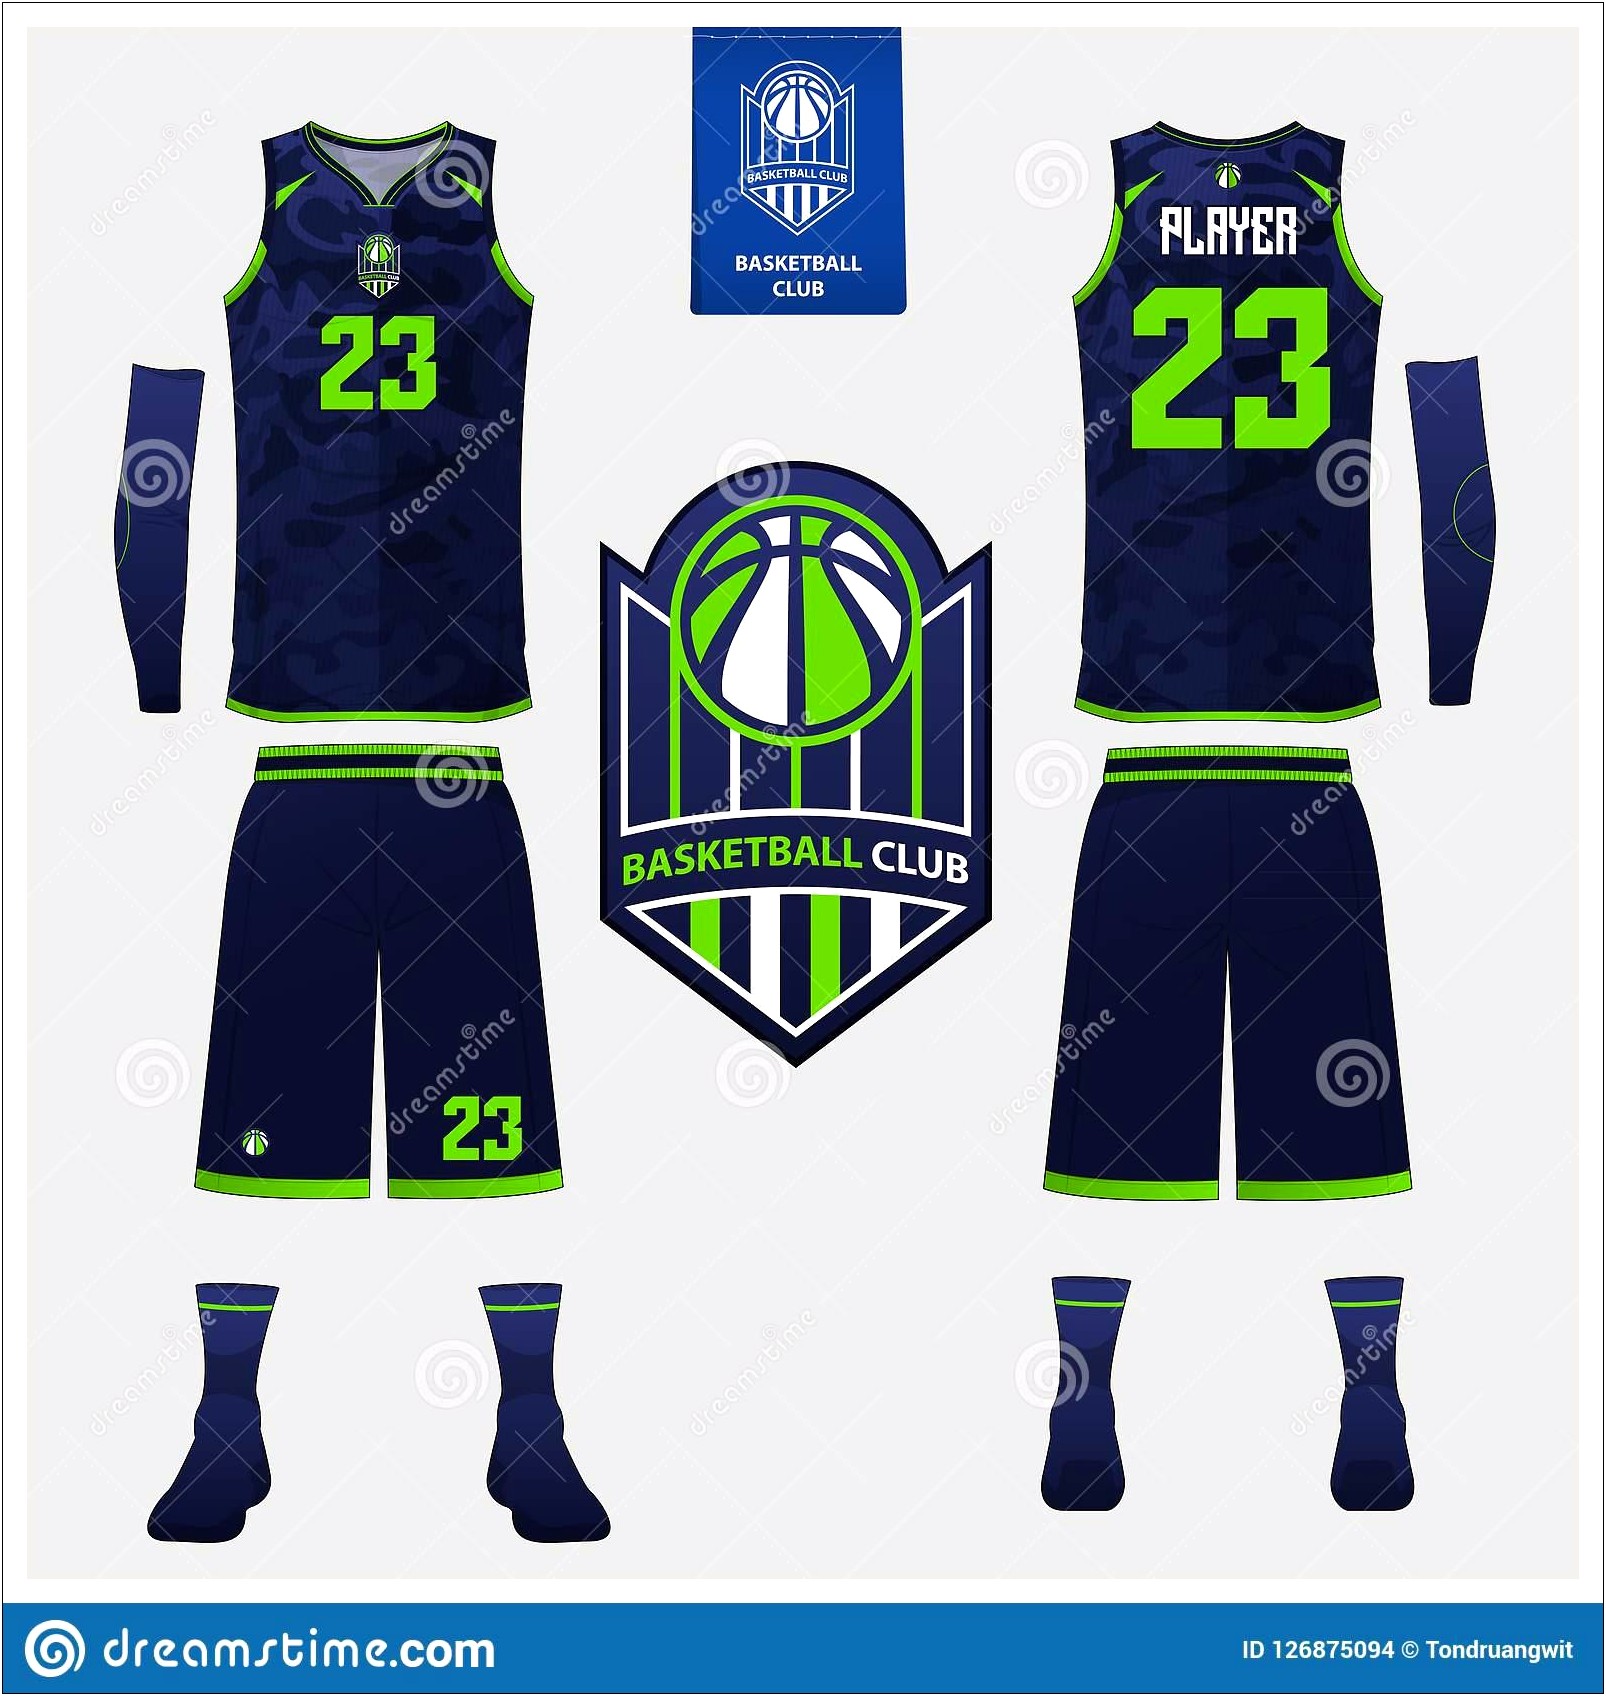 basketball-jersey-design-template-free-download-resume-example-gallery